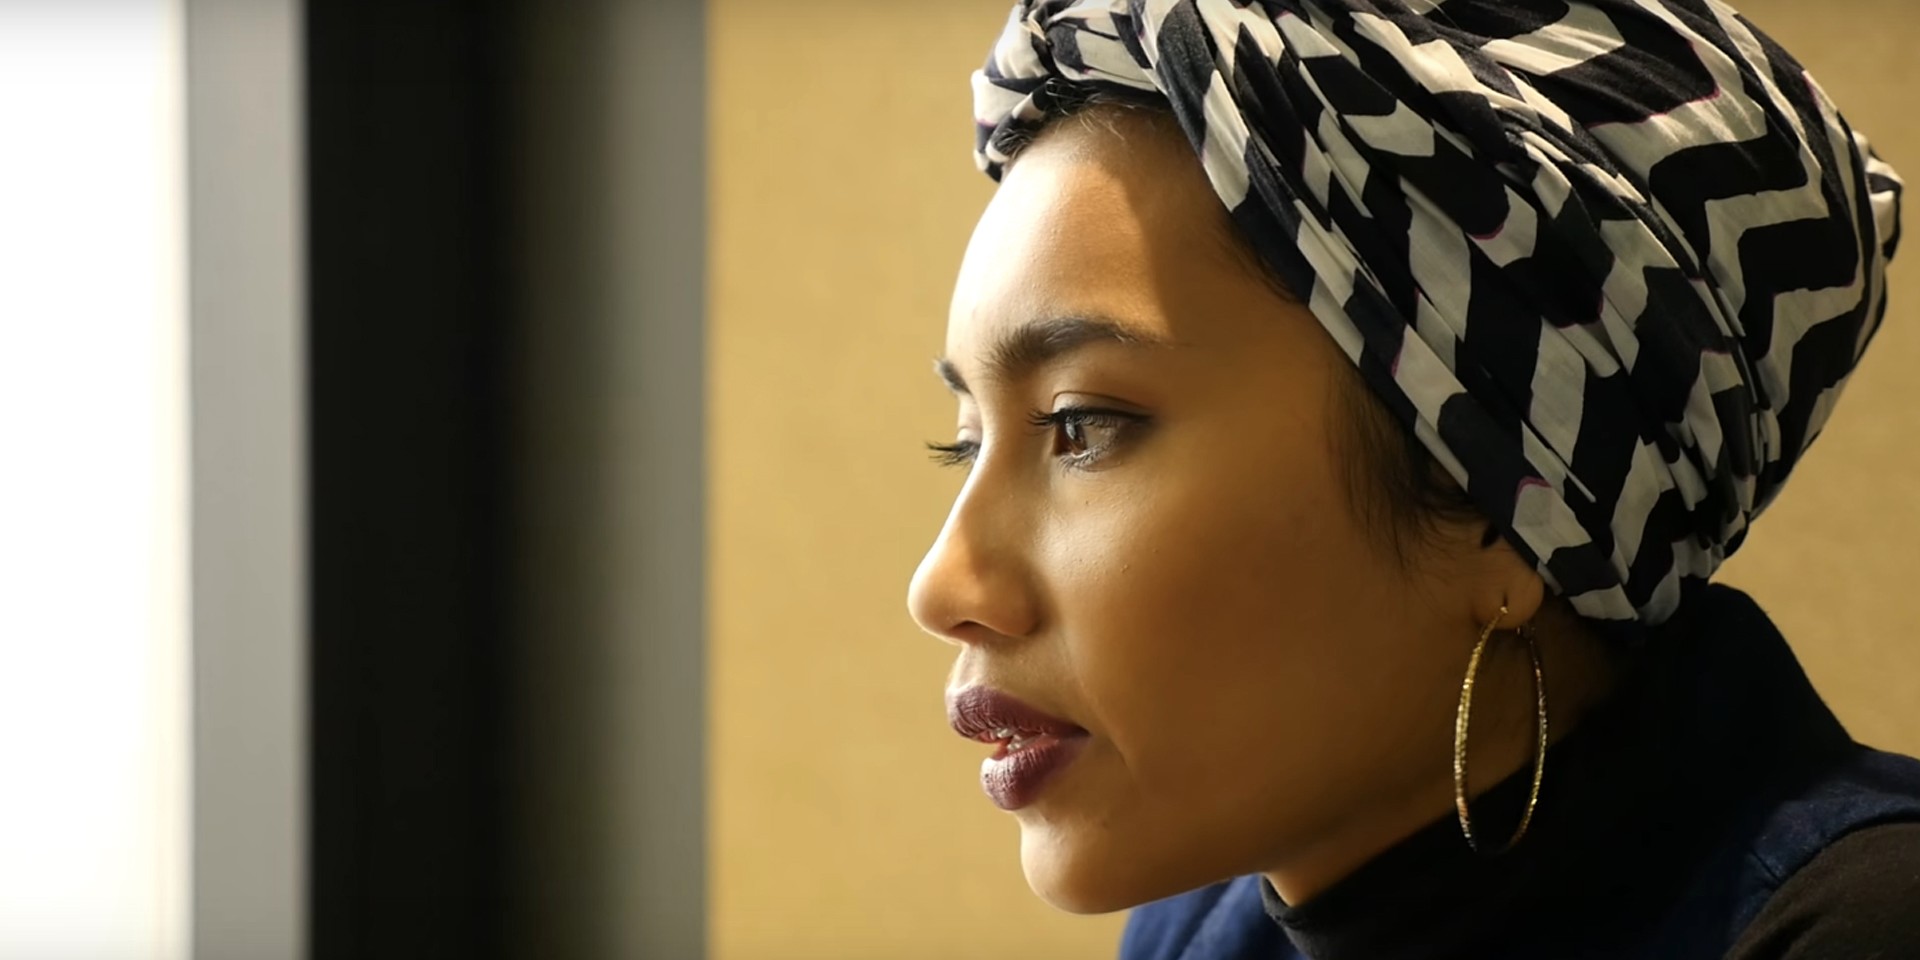 WATCH: Yuna talks about collaborating with Usher, her new 'urban' album and more